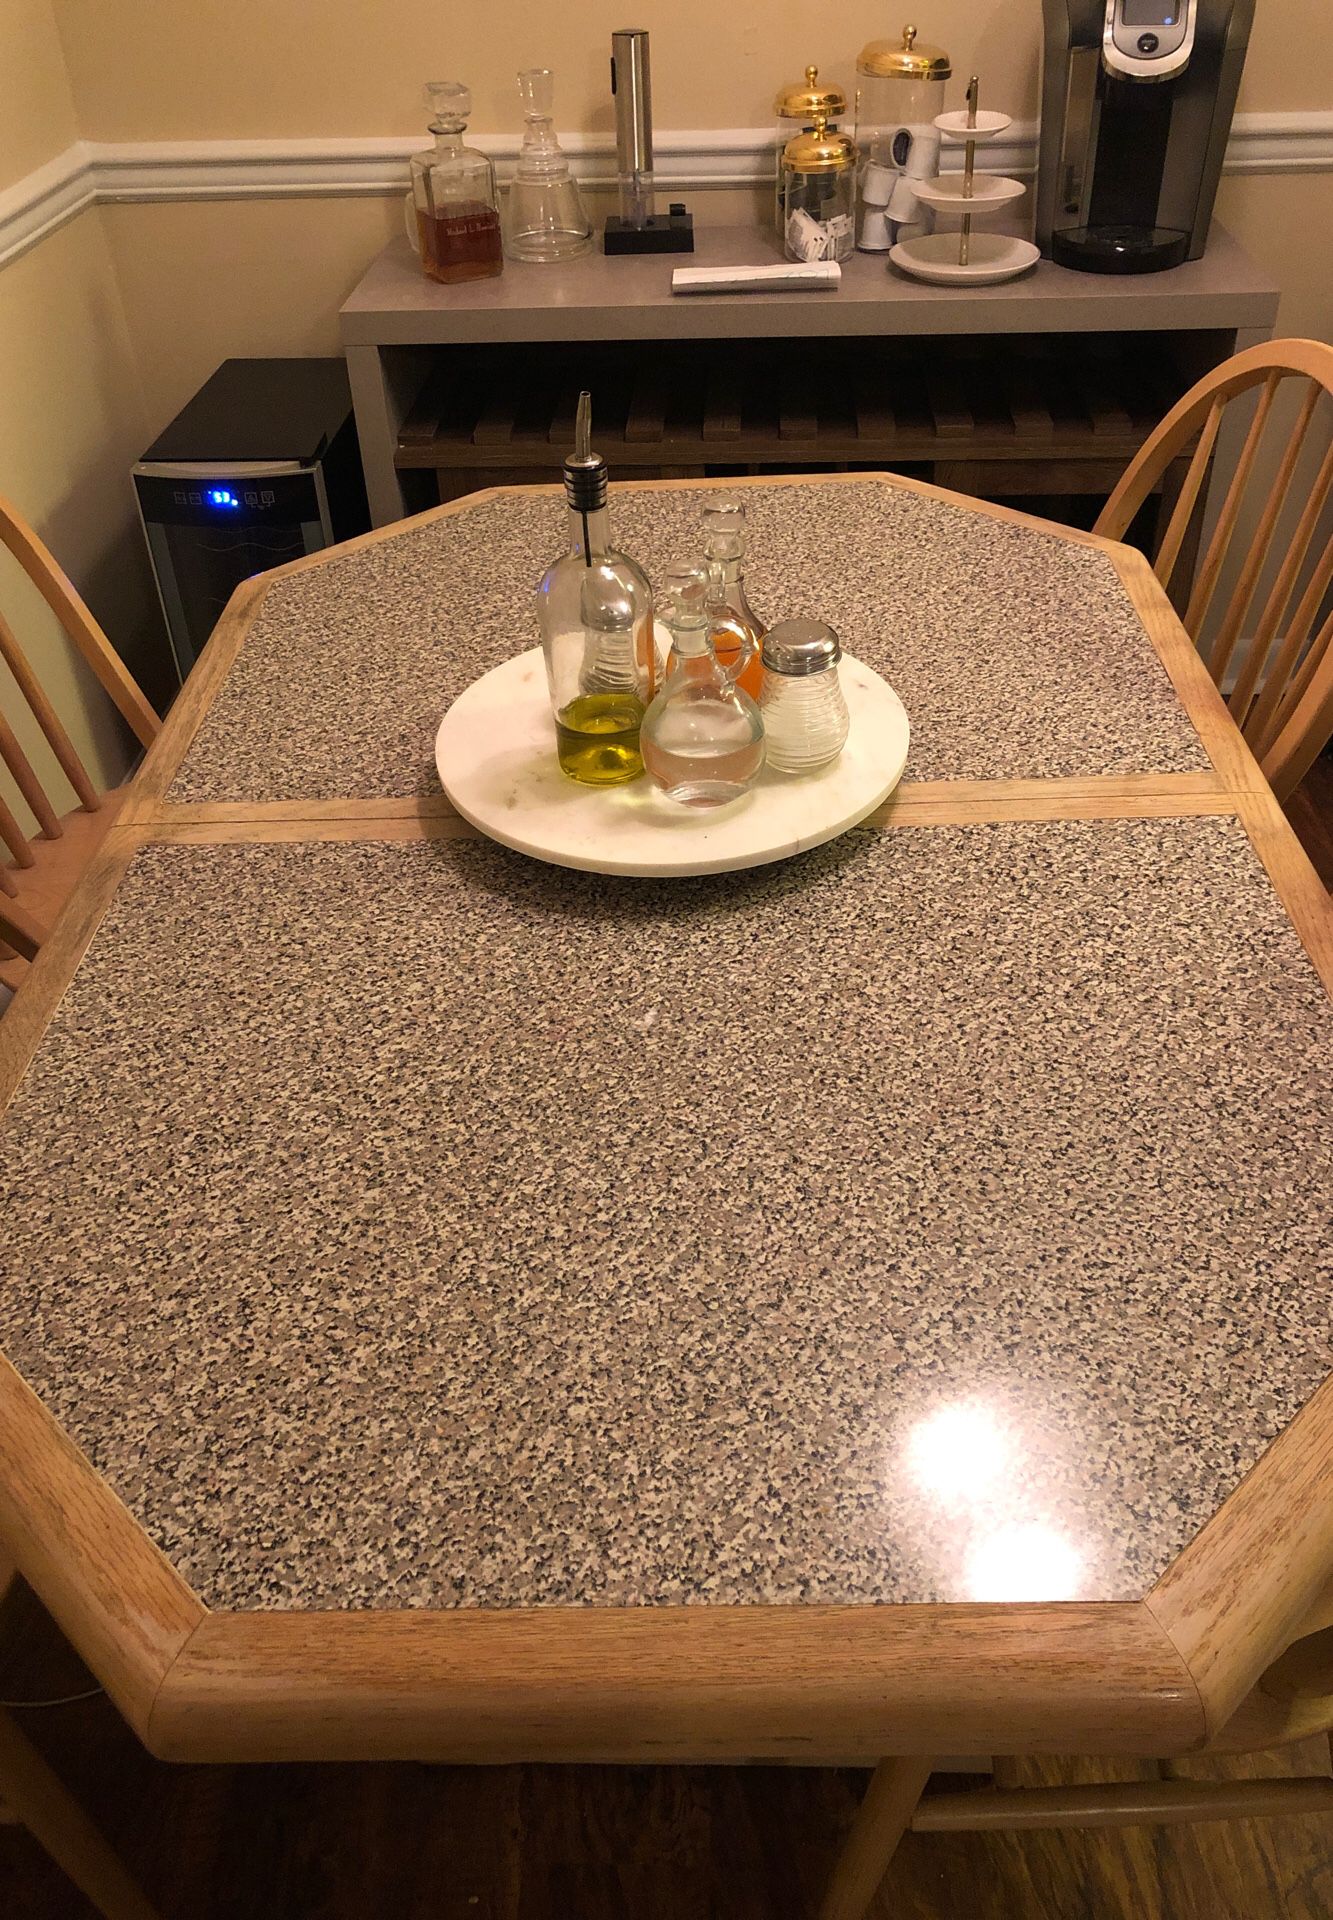 Kitchen table / chairs